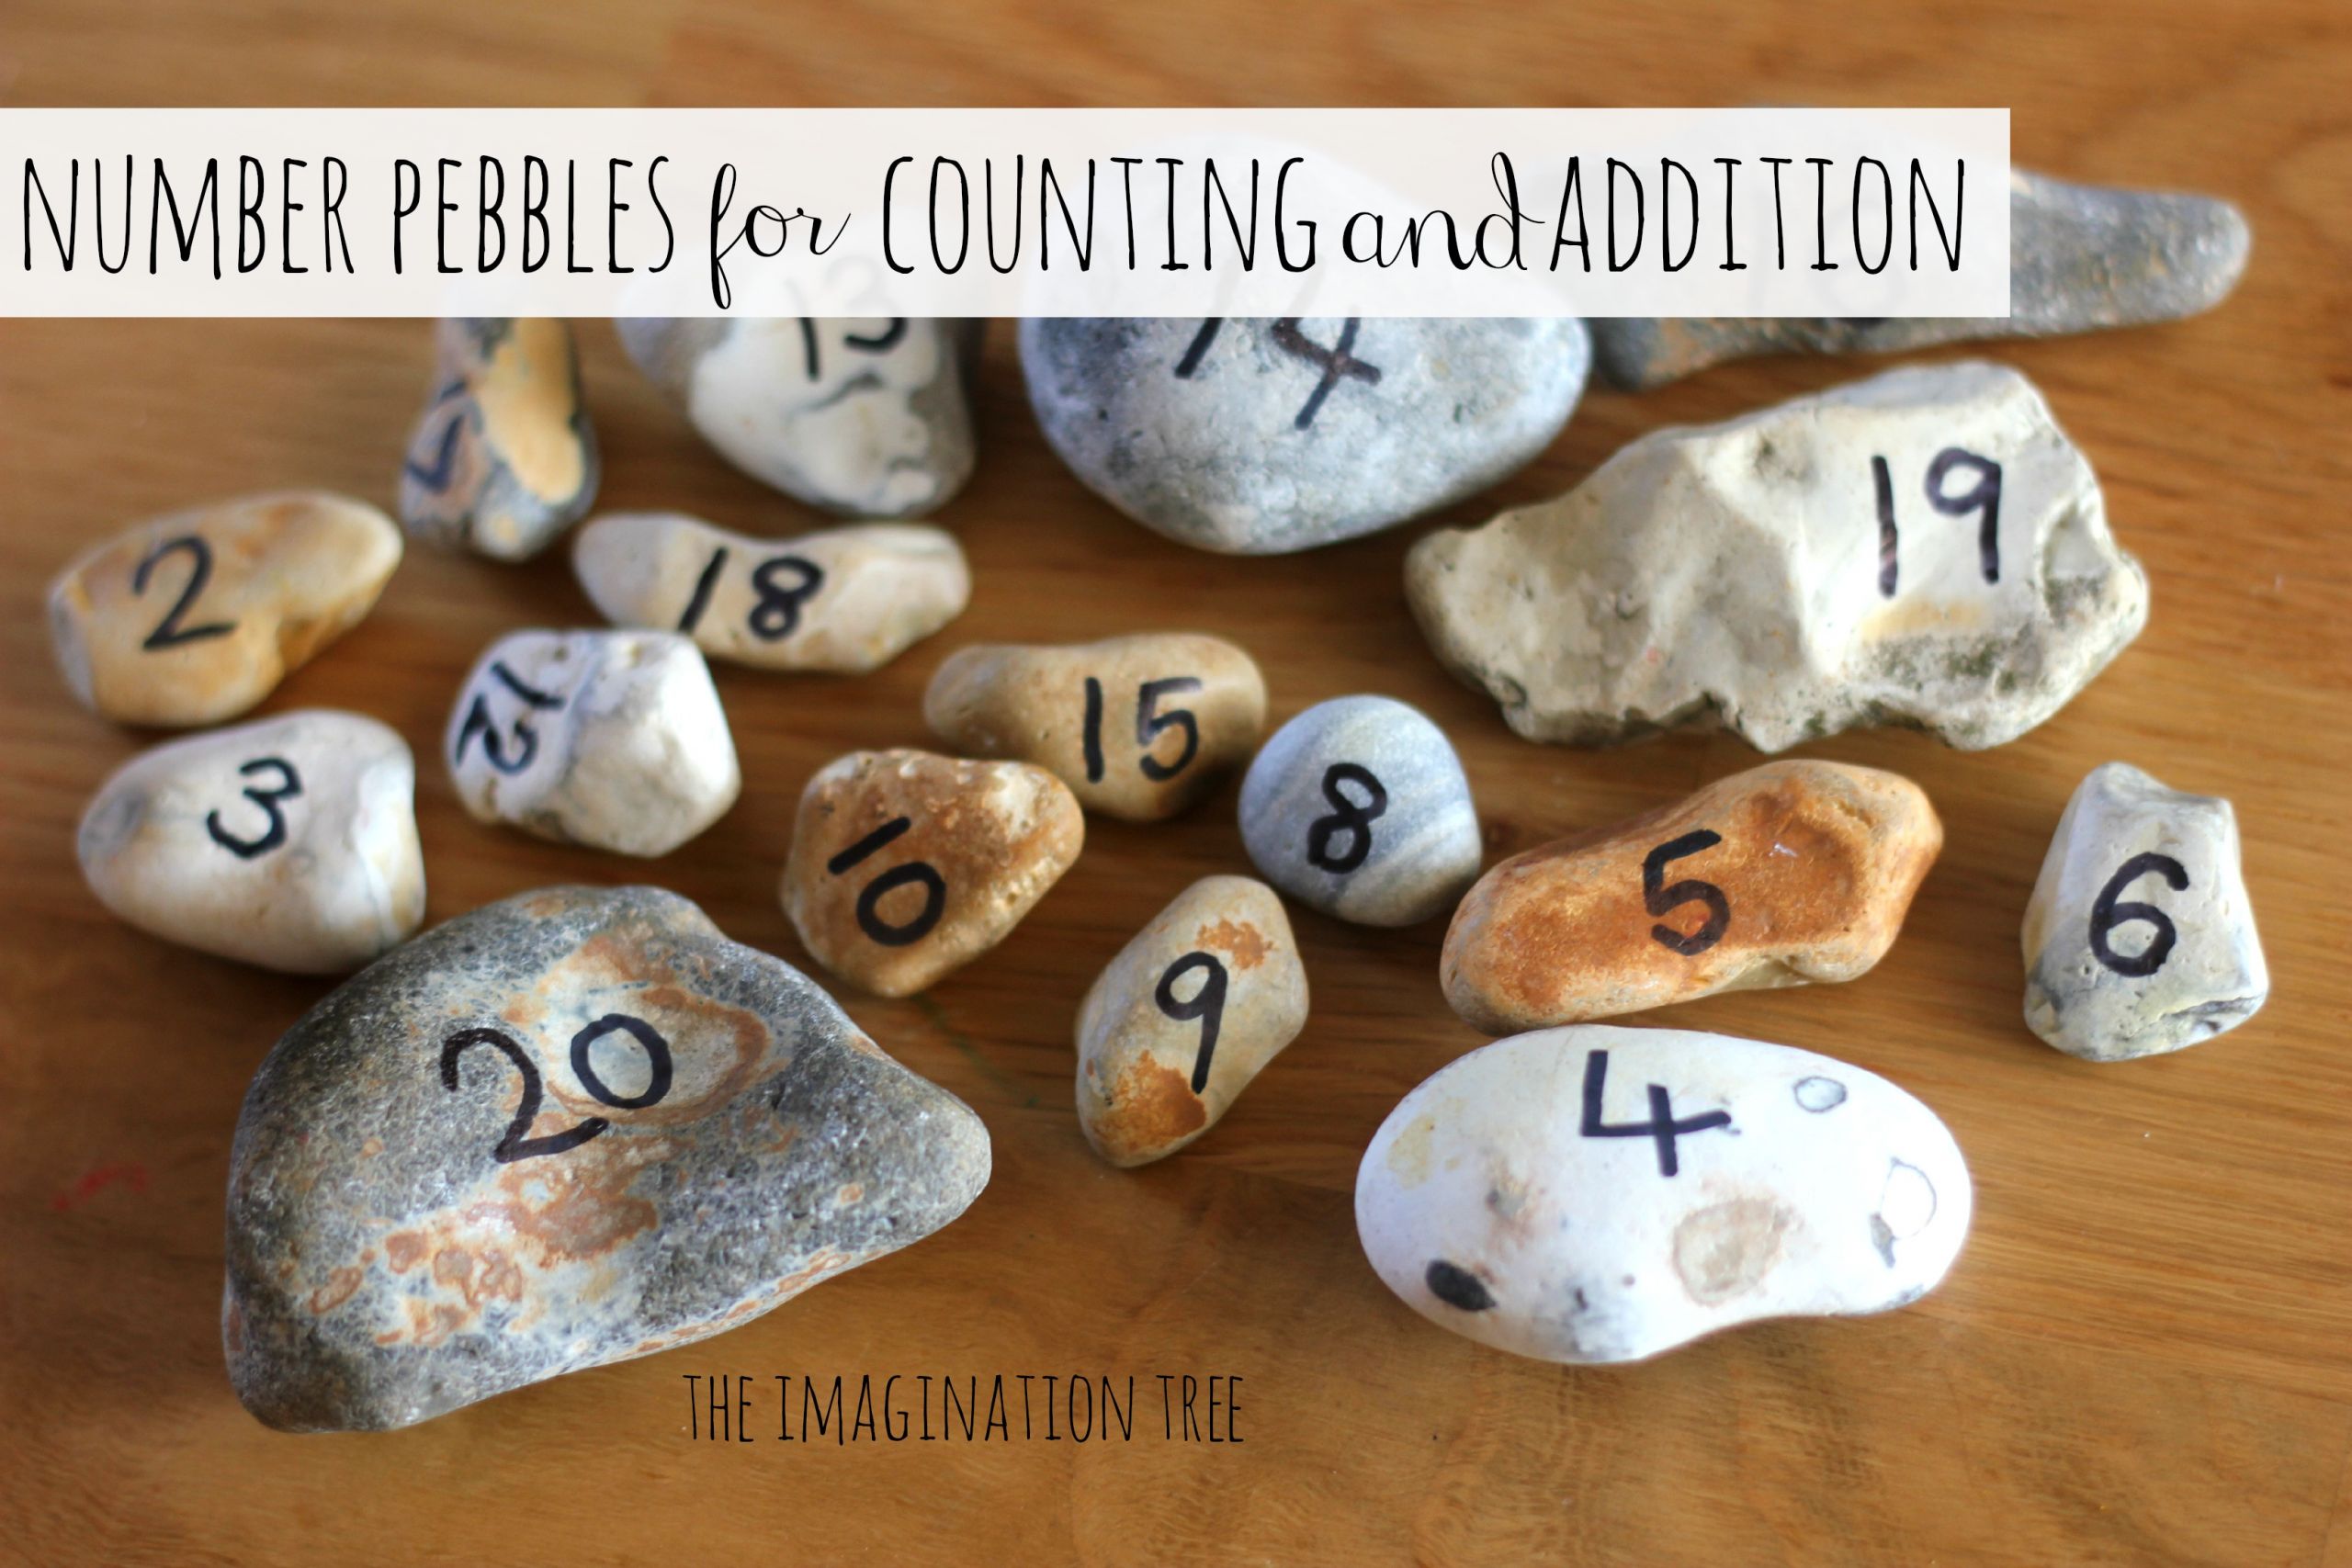 Number pebbles for counting and addition games